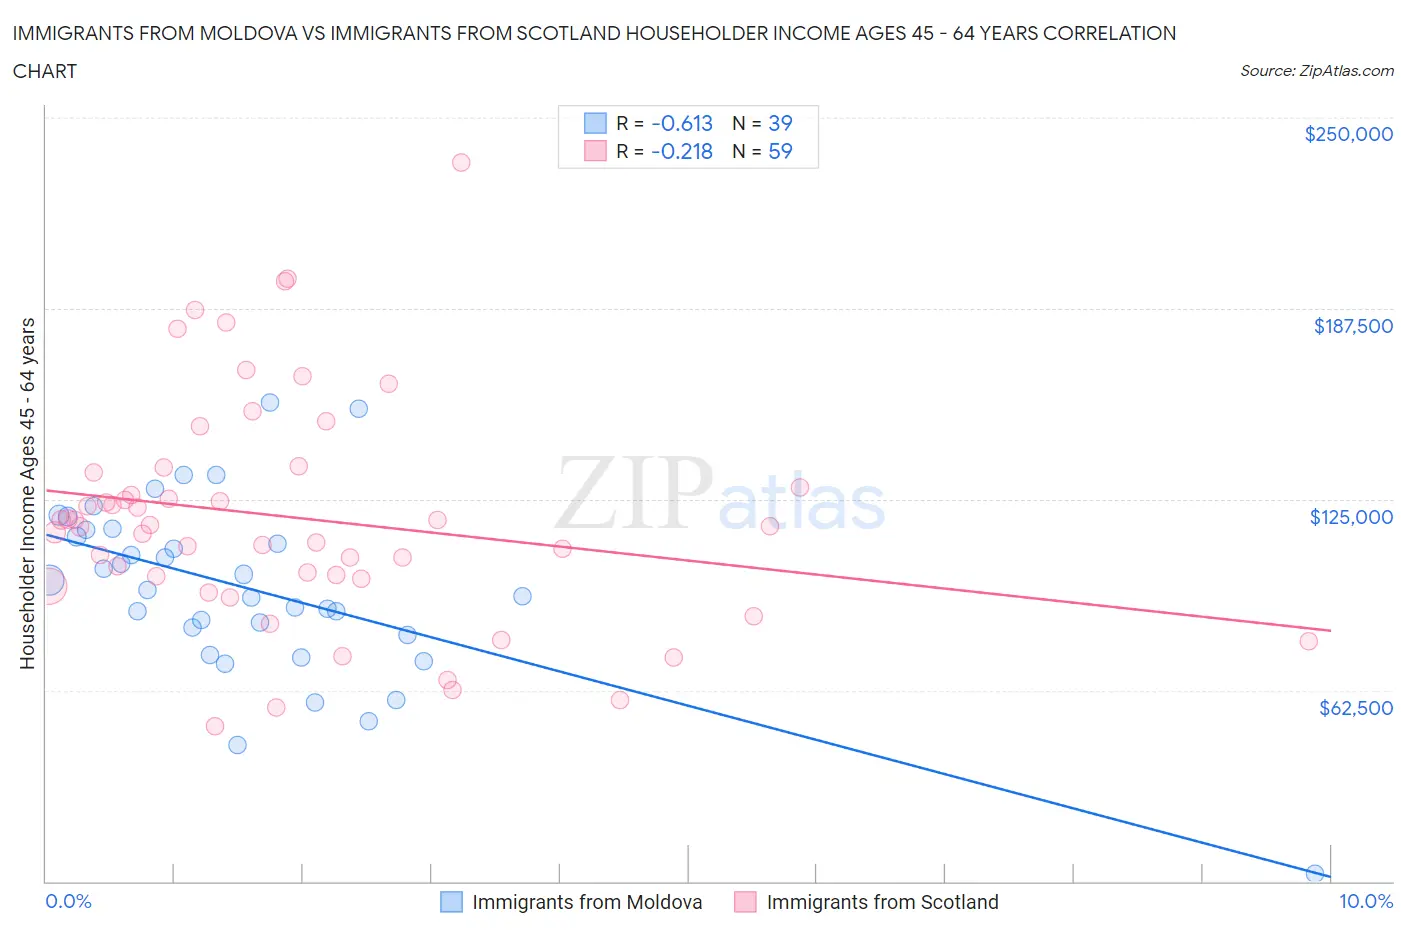 Immigrants from Moldova vs Immigrants from Scotland Householder Income Ages 45 - 64 years